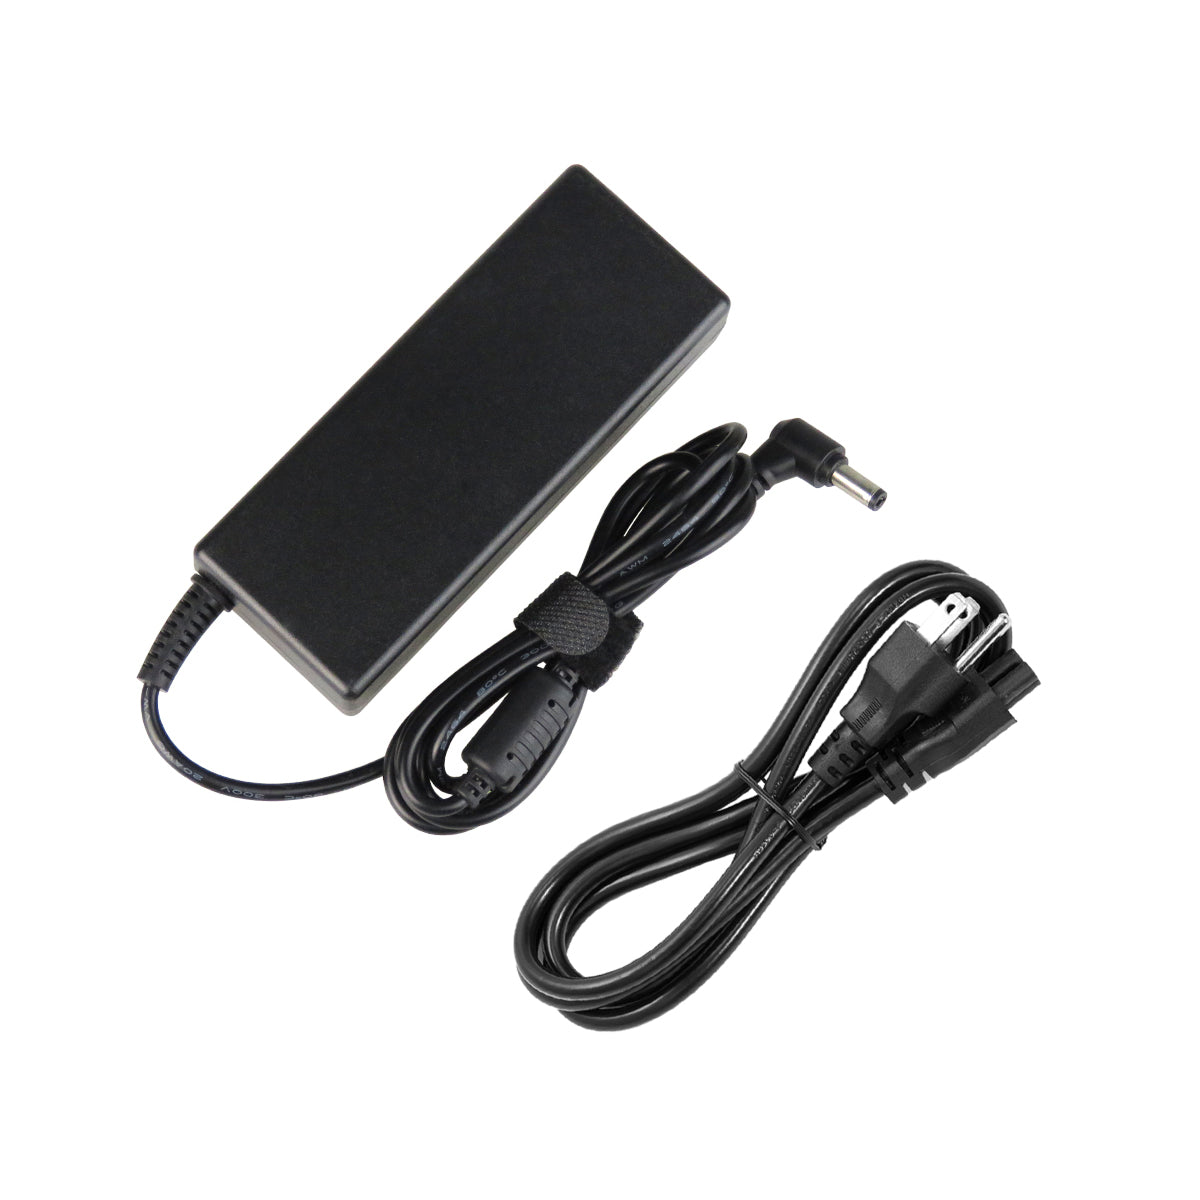 AC Adapter Charger for Toshiba Satellite l875d Notebook.